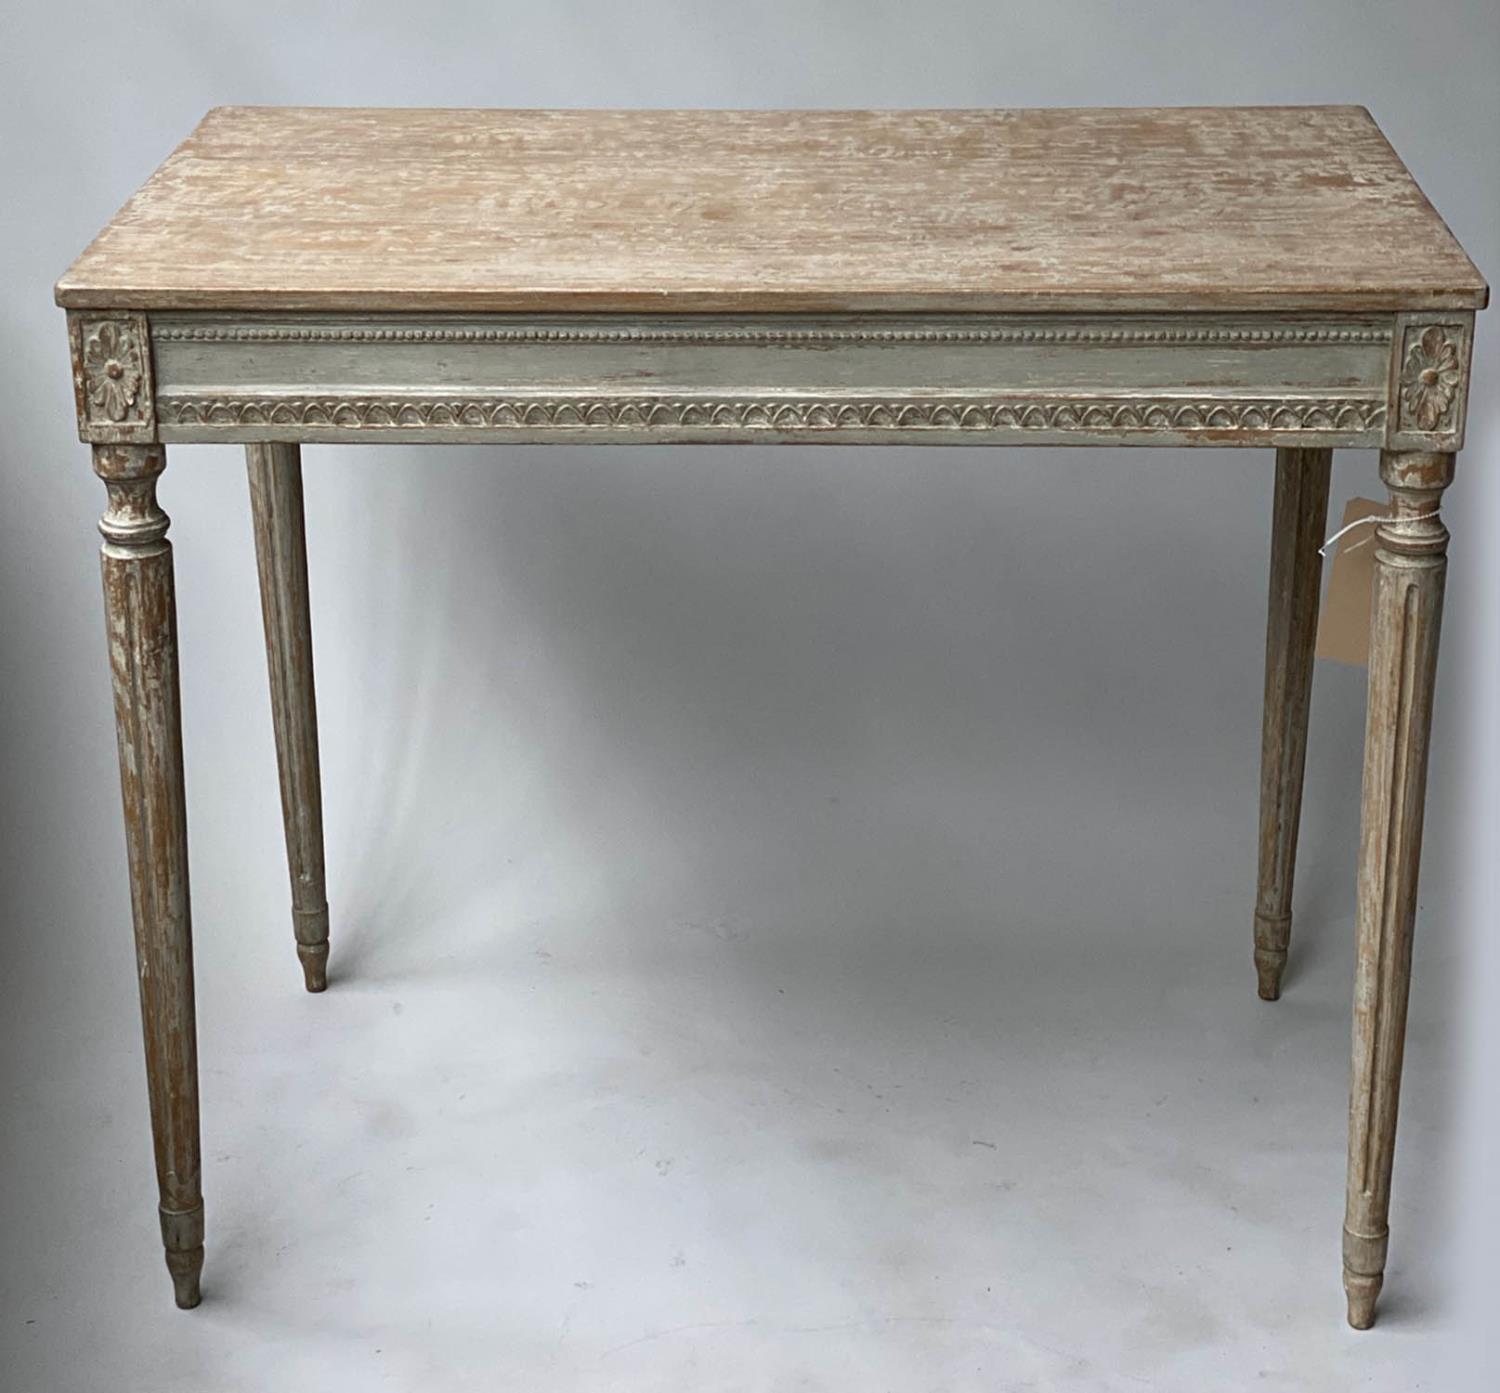 SIDE TABLE, Swedish Louis XVI style grey painted rectangular with fluted supports, 87cm x 50cm x